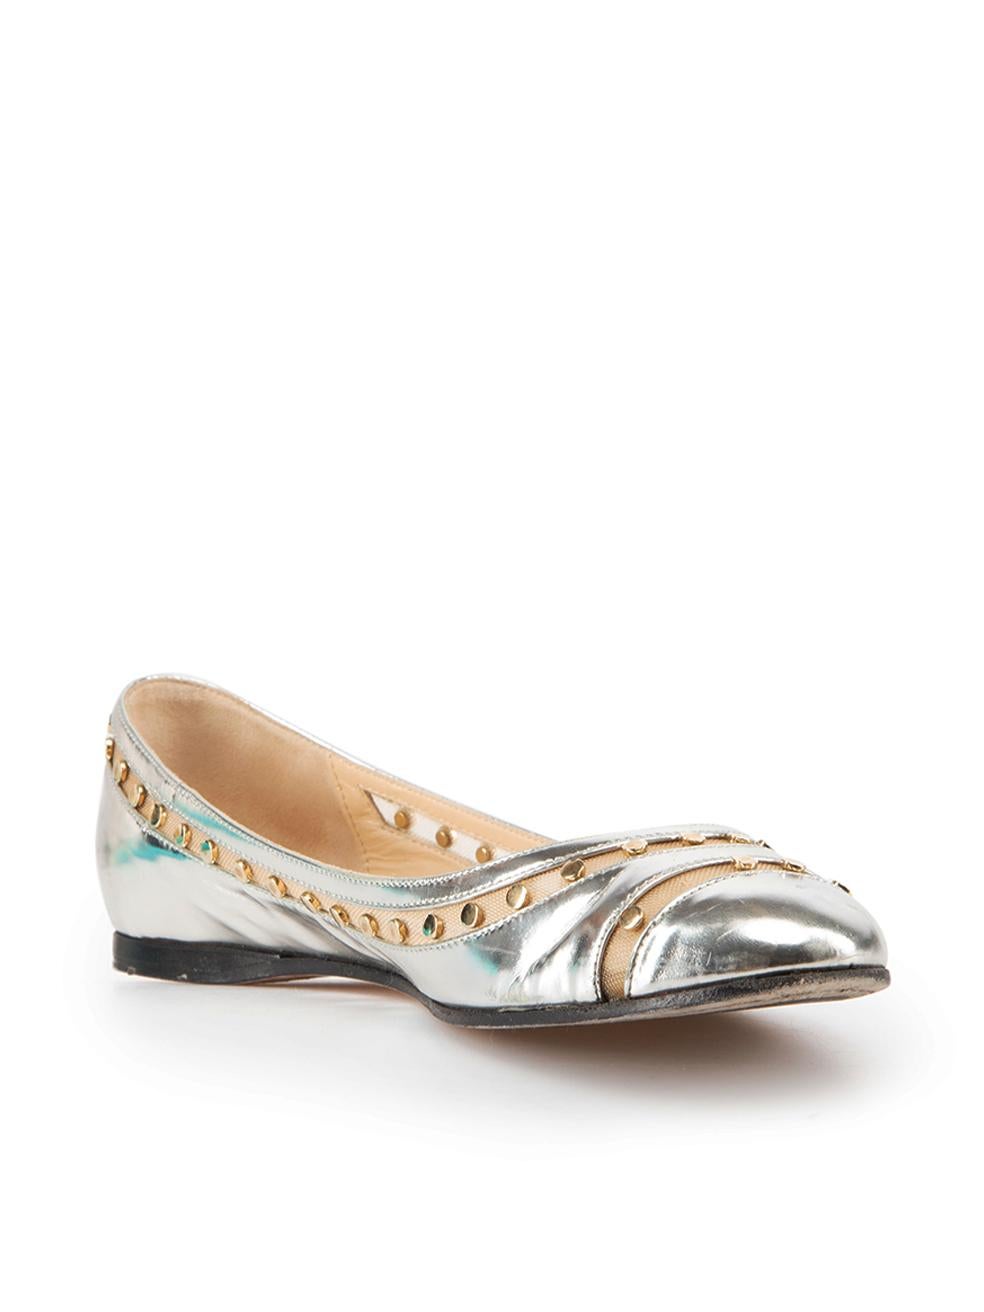 CONDITION is Good. General wear to ballet flats is evident. Moderate scratch marks to metallic leather, creasing to toe creases, general wear to outer sole and some studs missing on mesh detail on this used Jimmy Choo designer resale item. Original